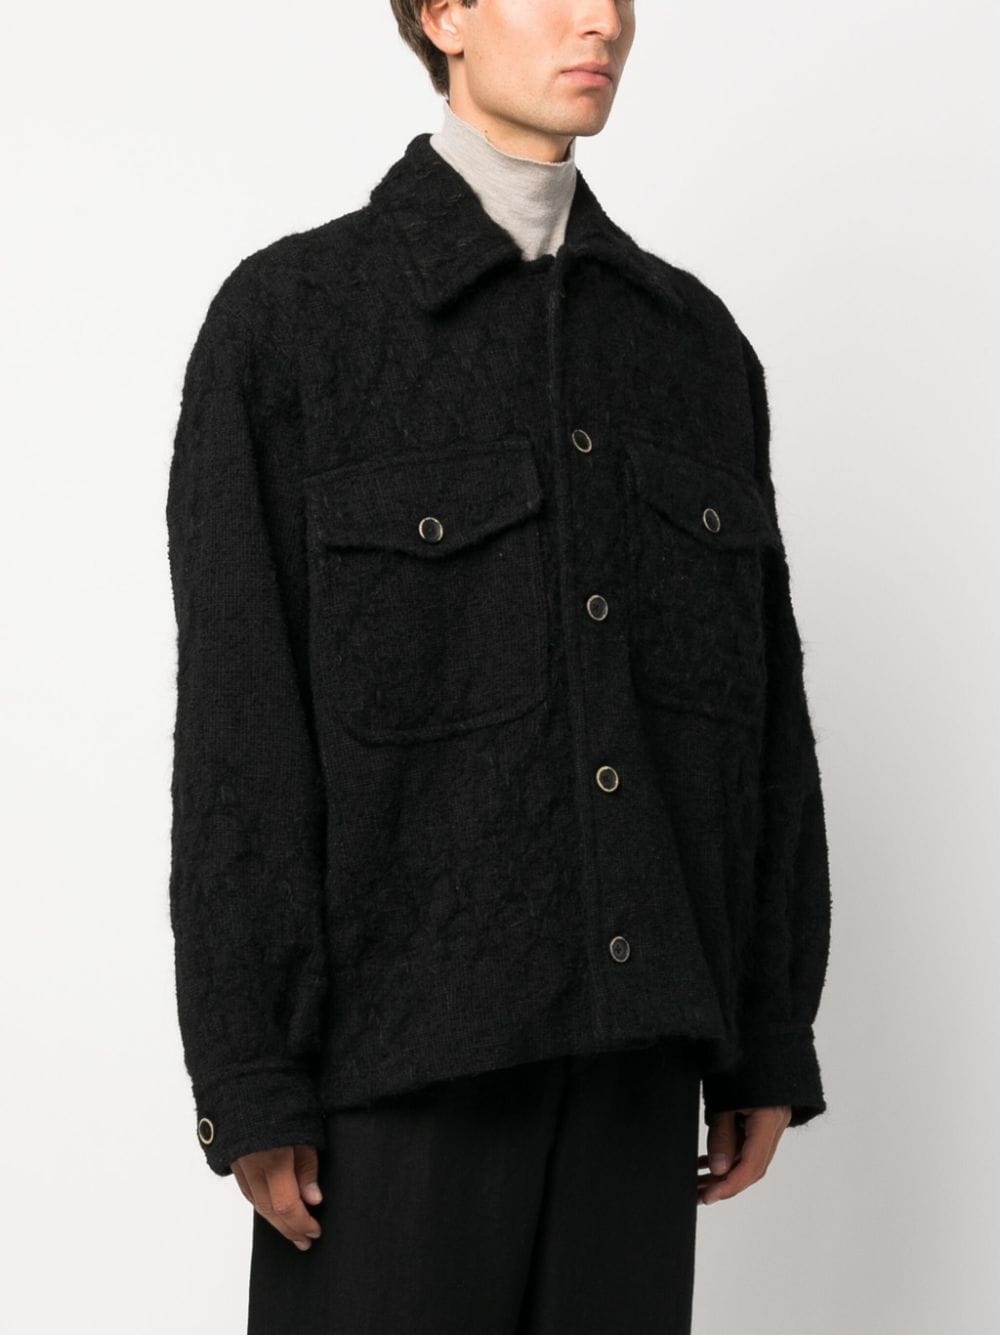 distressed-effect knitted shirt jacket - 3